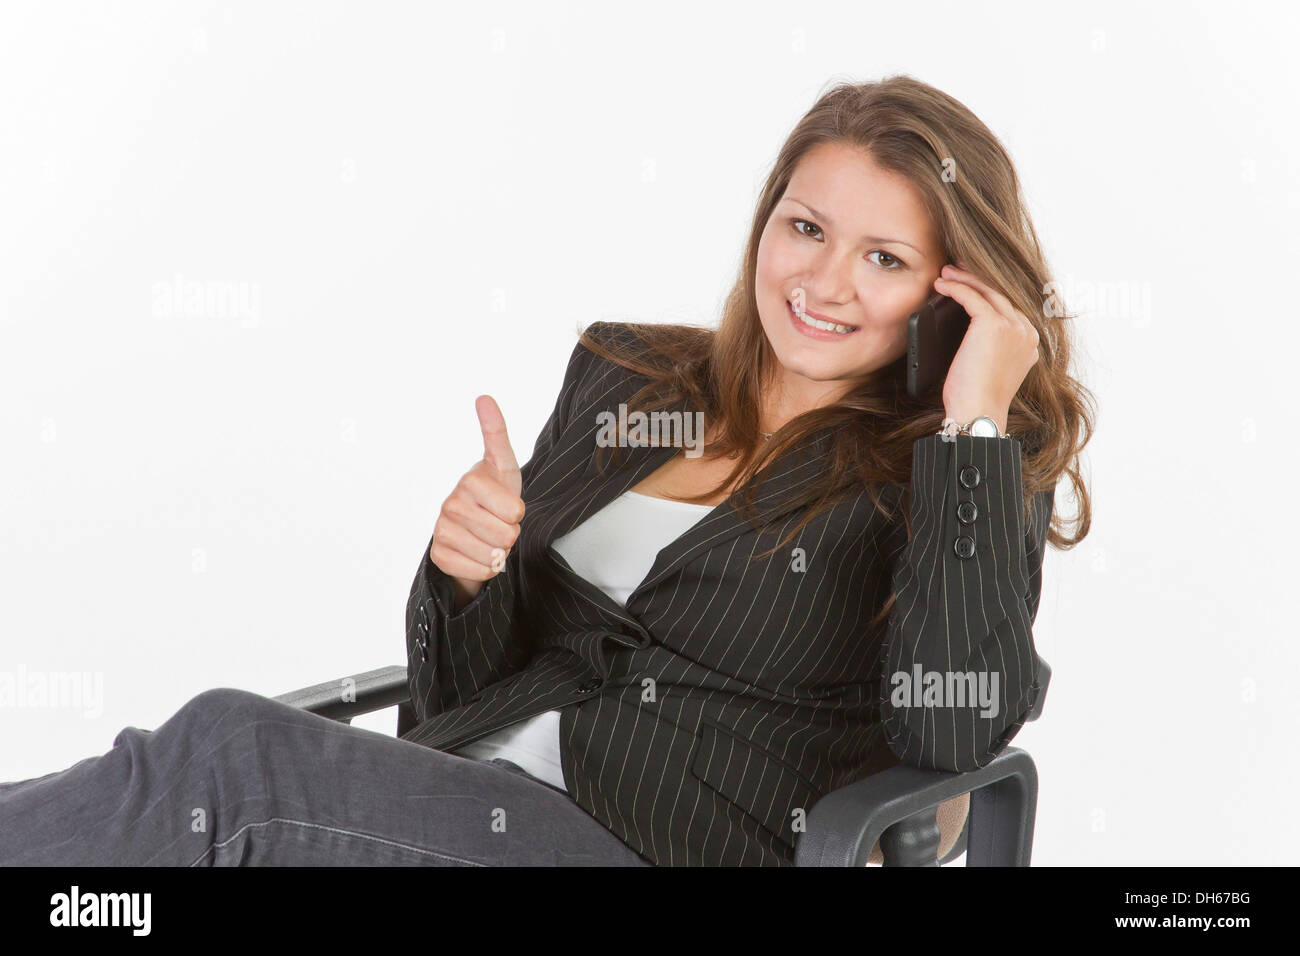 Young woman sitting on an office chair, making thumbs up gesture Stock Photo